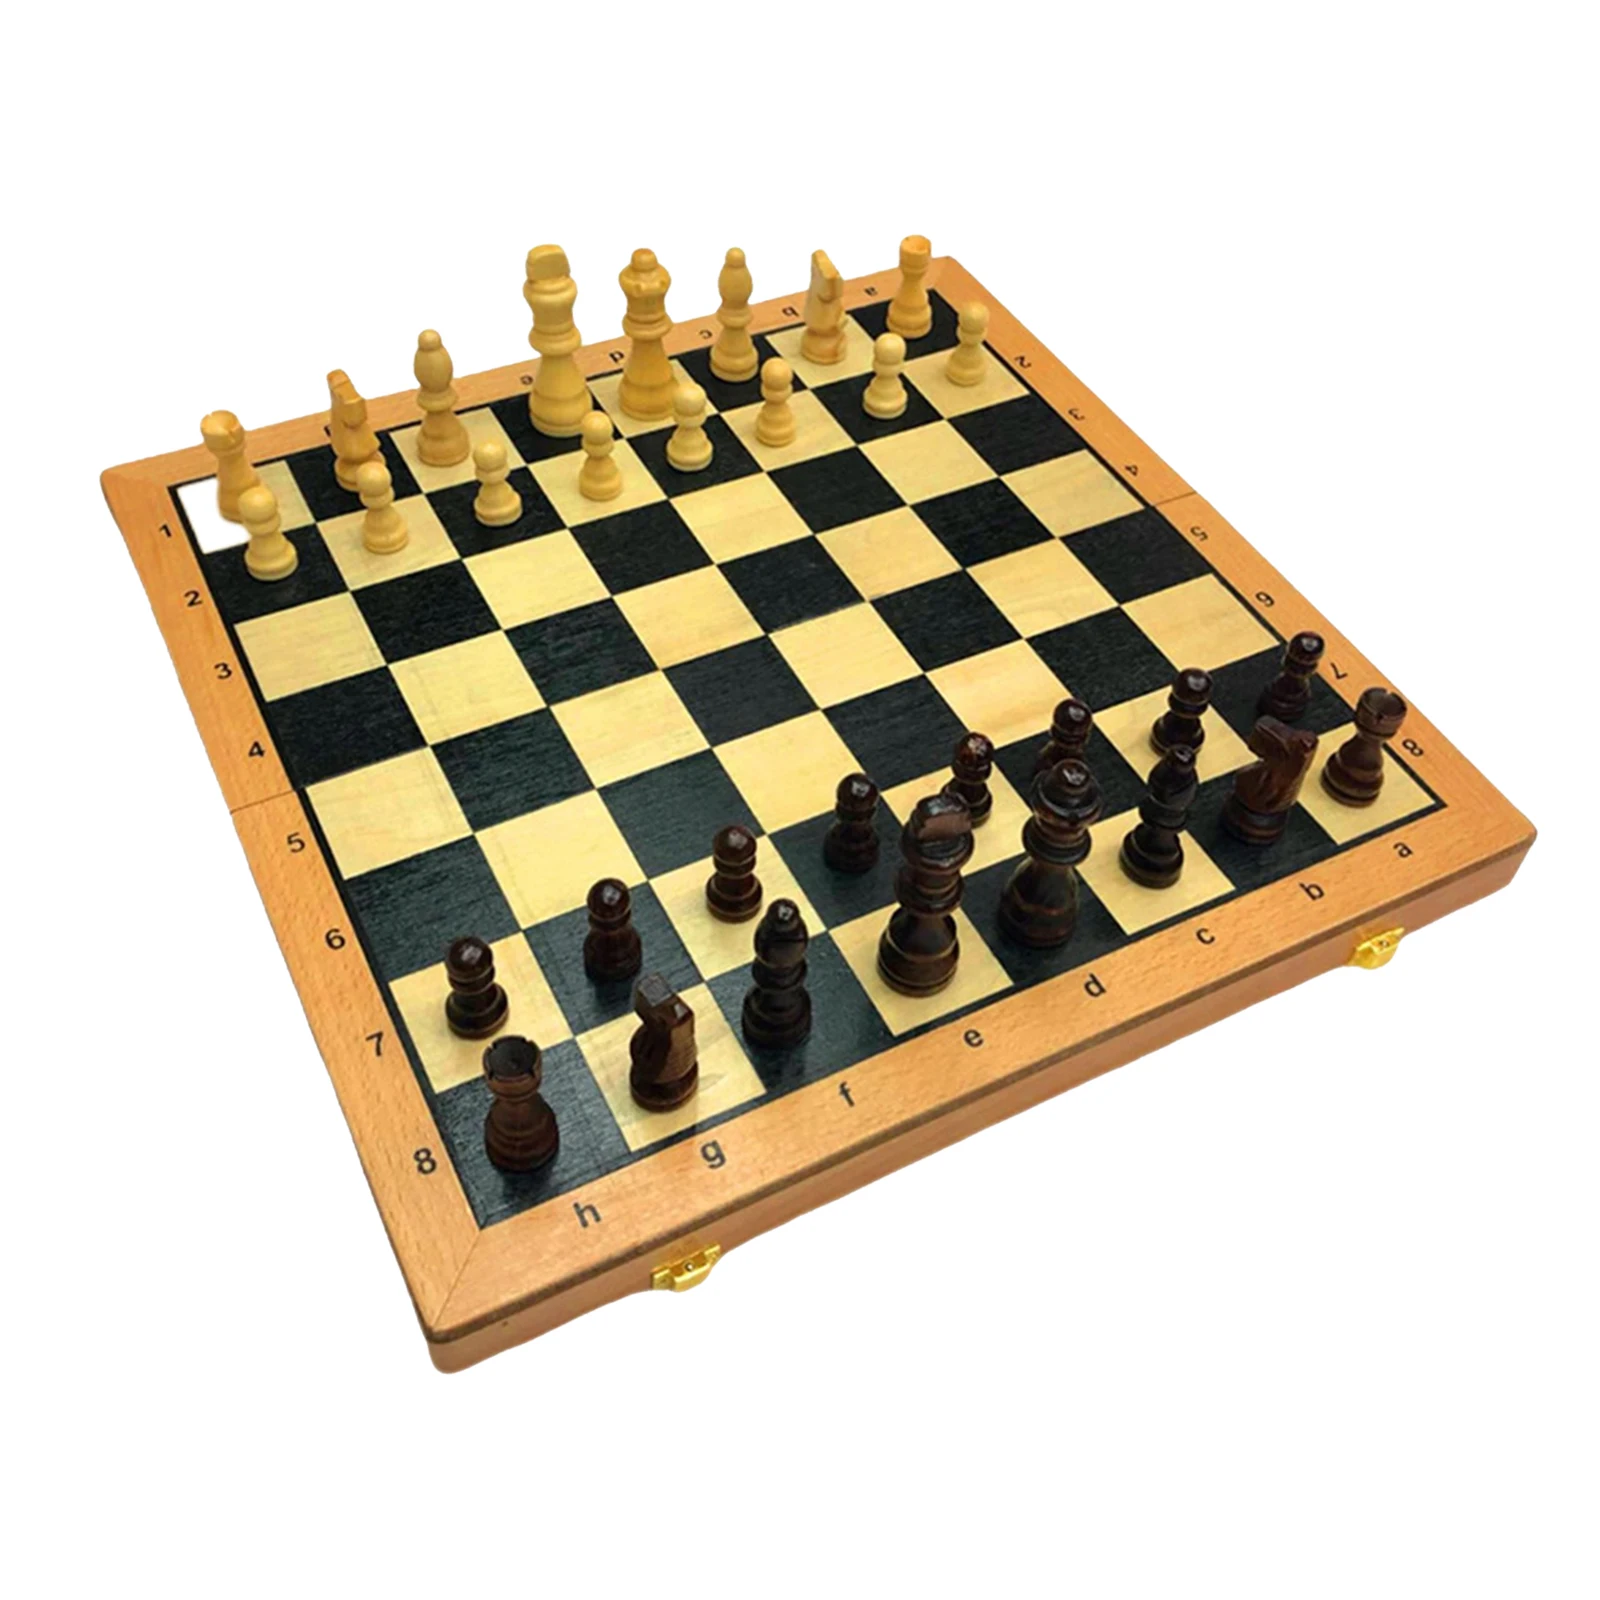 39x39cm Large Wooden Chess Set Folding Chessboard Portable Travel Handmade Vintage Board Board Game Great Gift